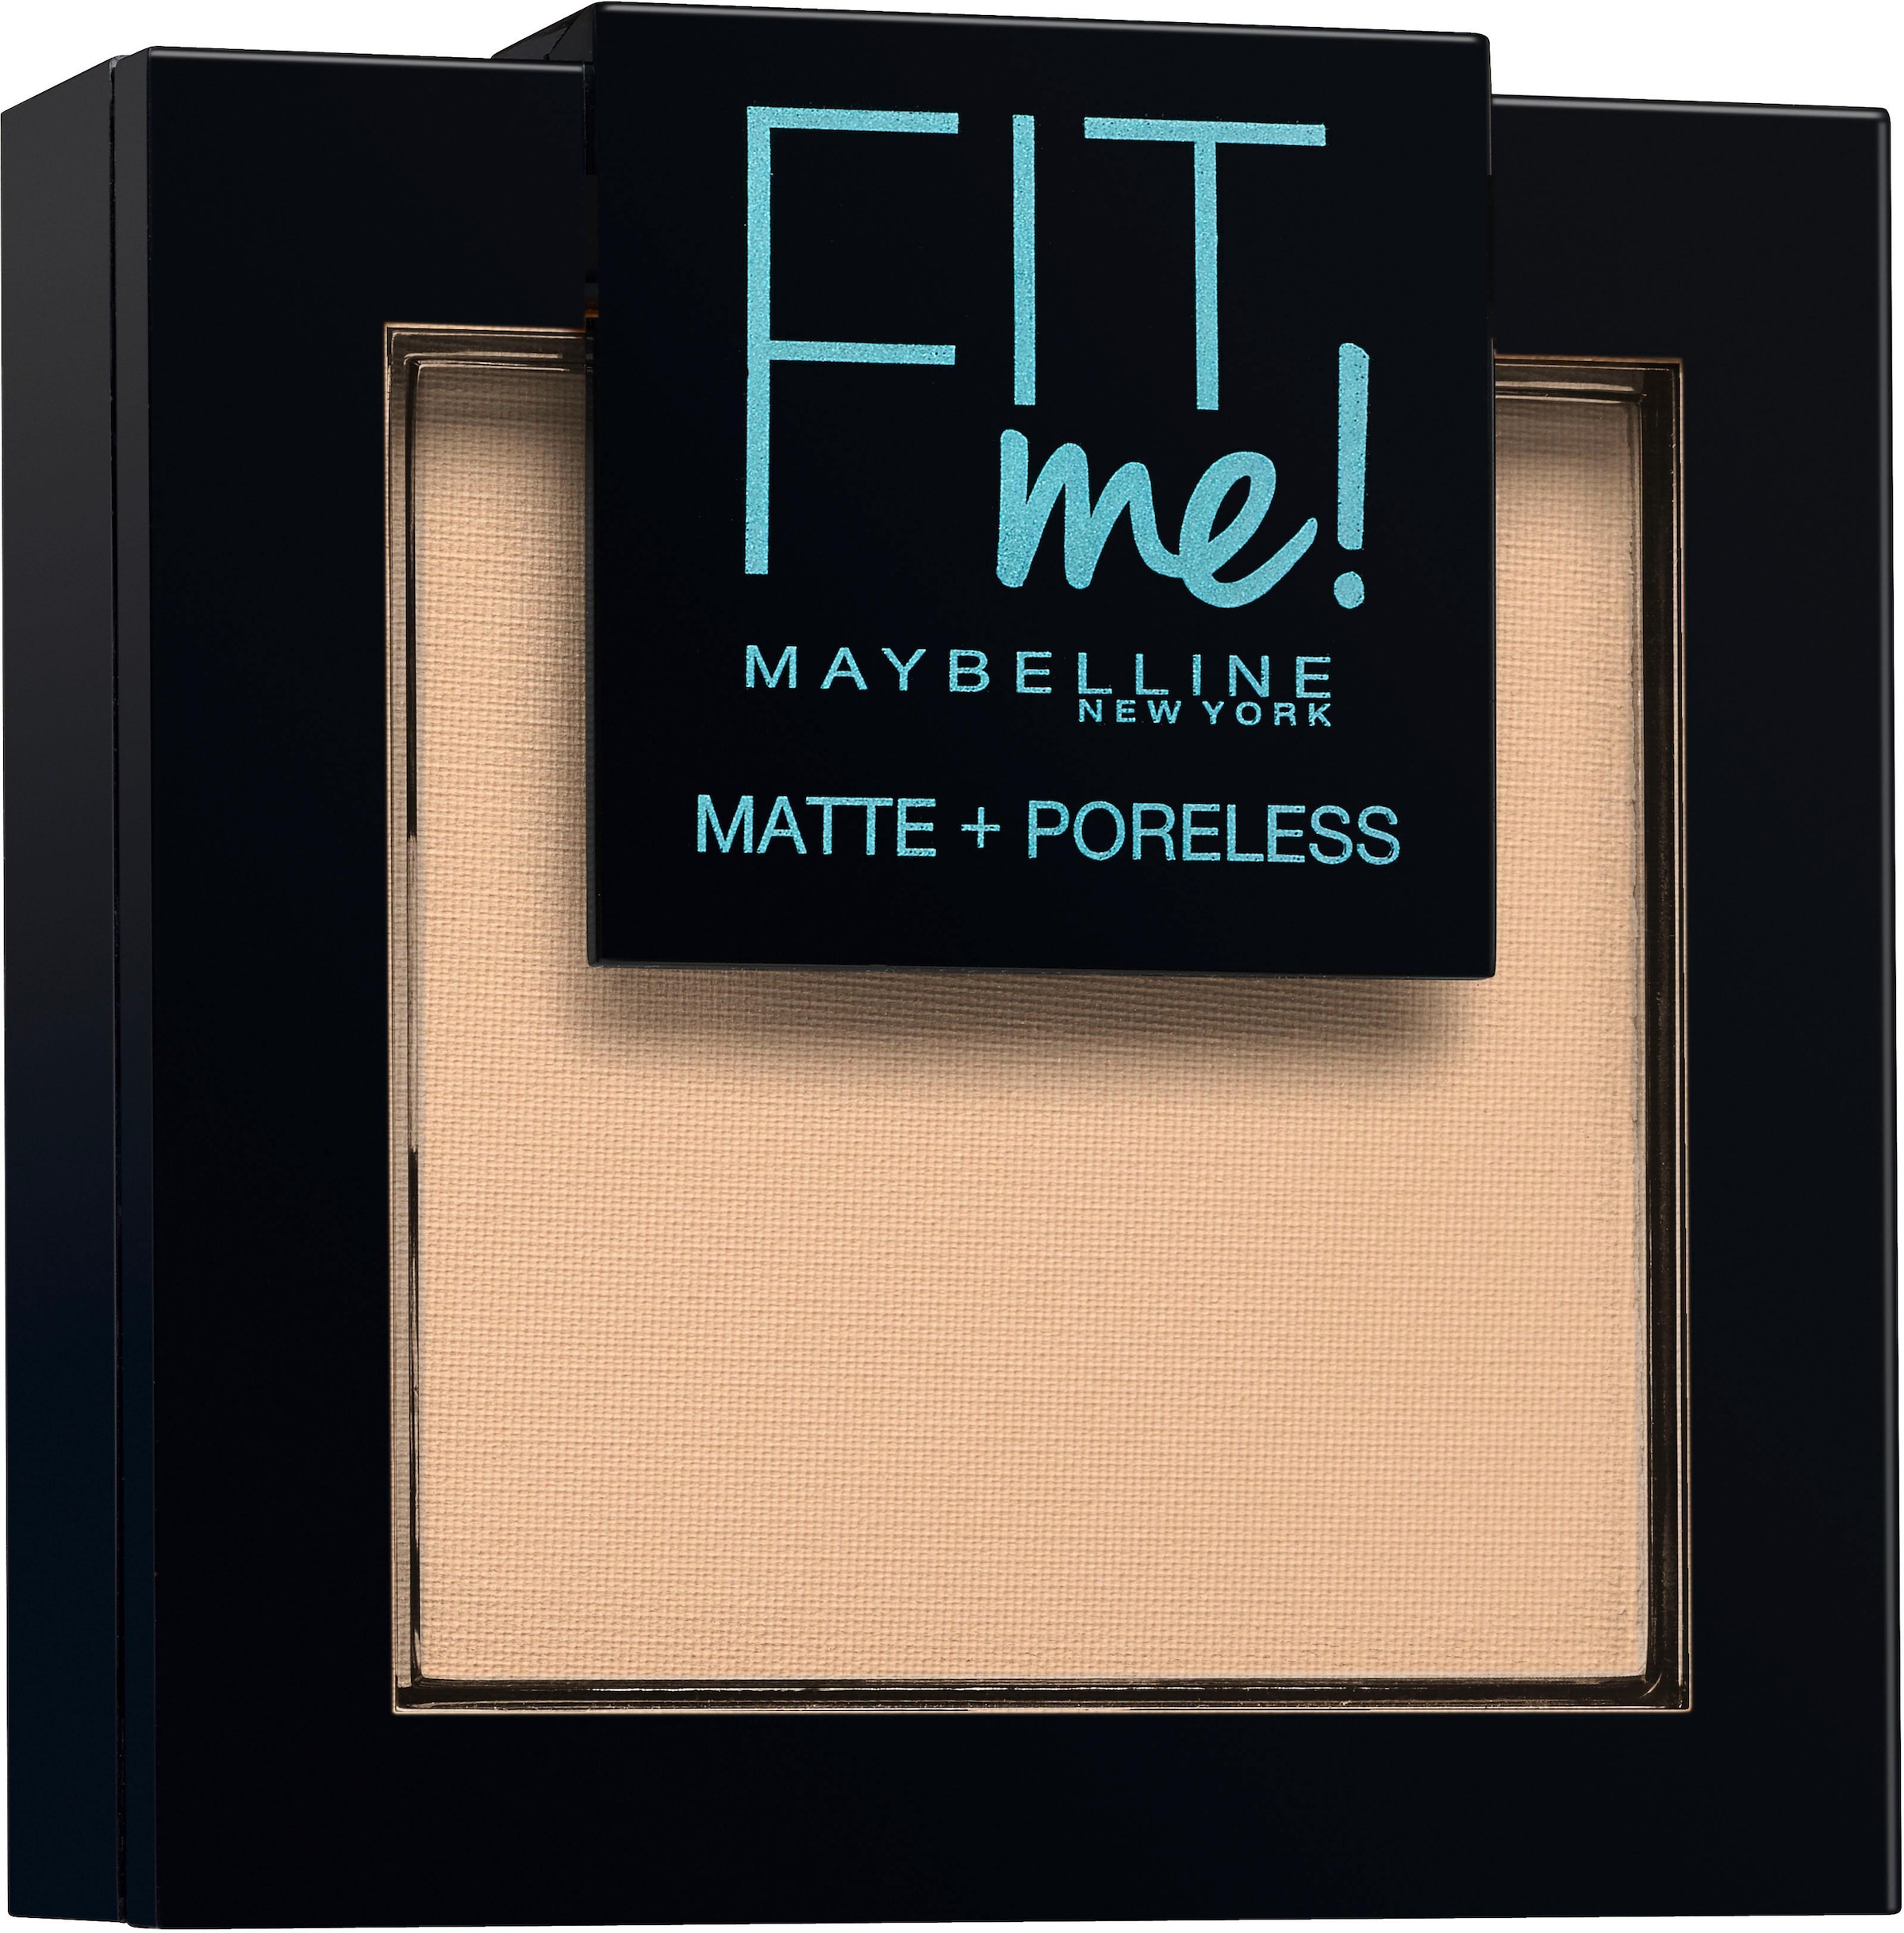 MAYBELLINE NEW YORK ME Puder online Poreless« OTTO & Matte »FIT bei